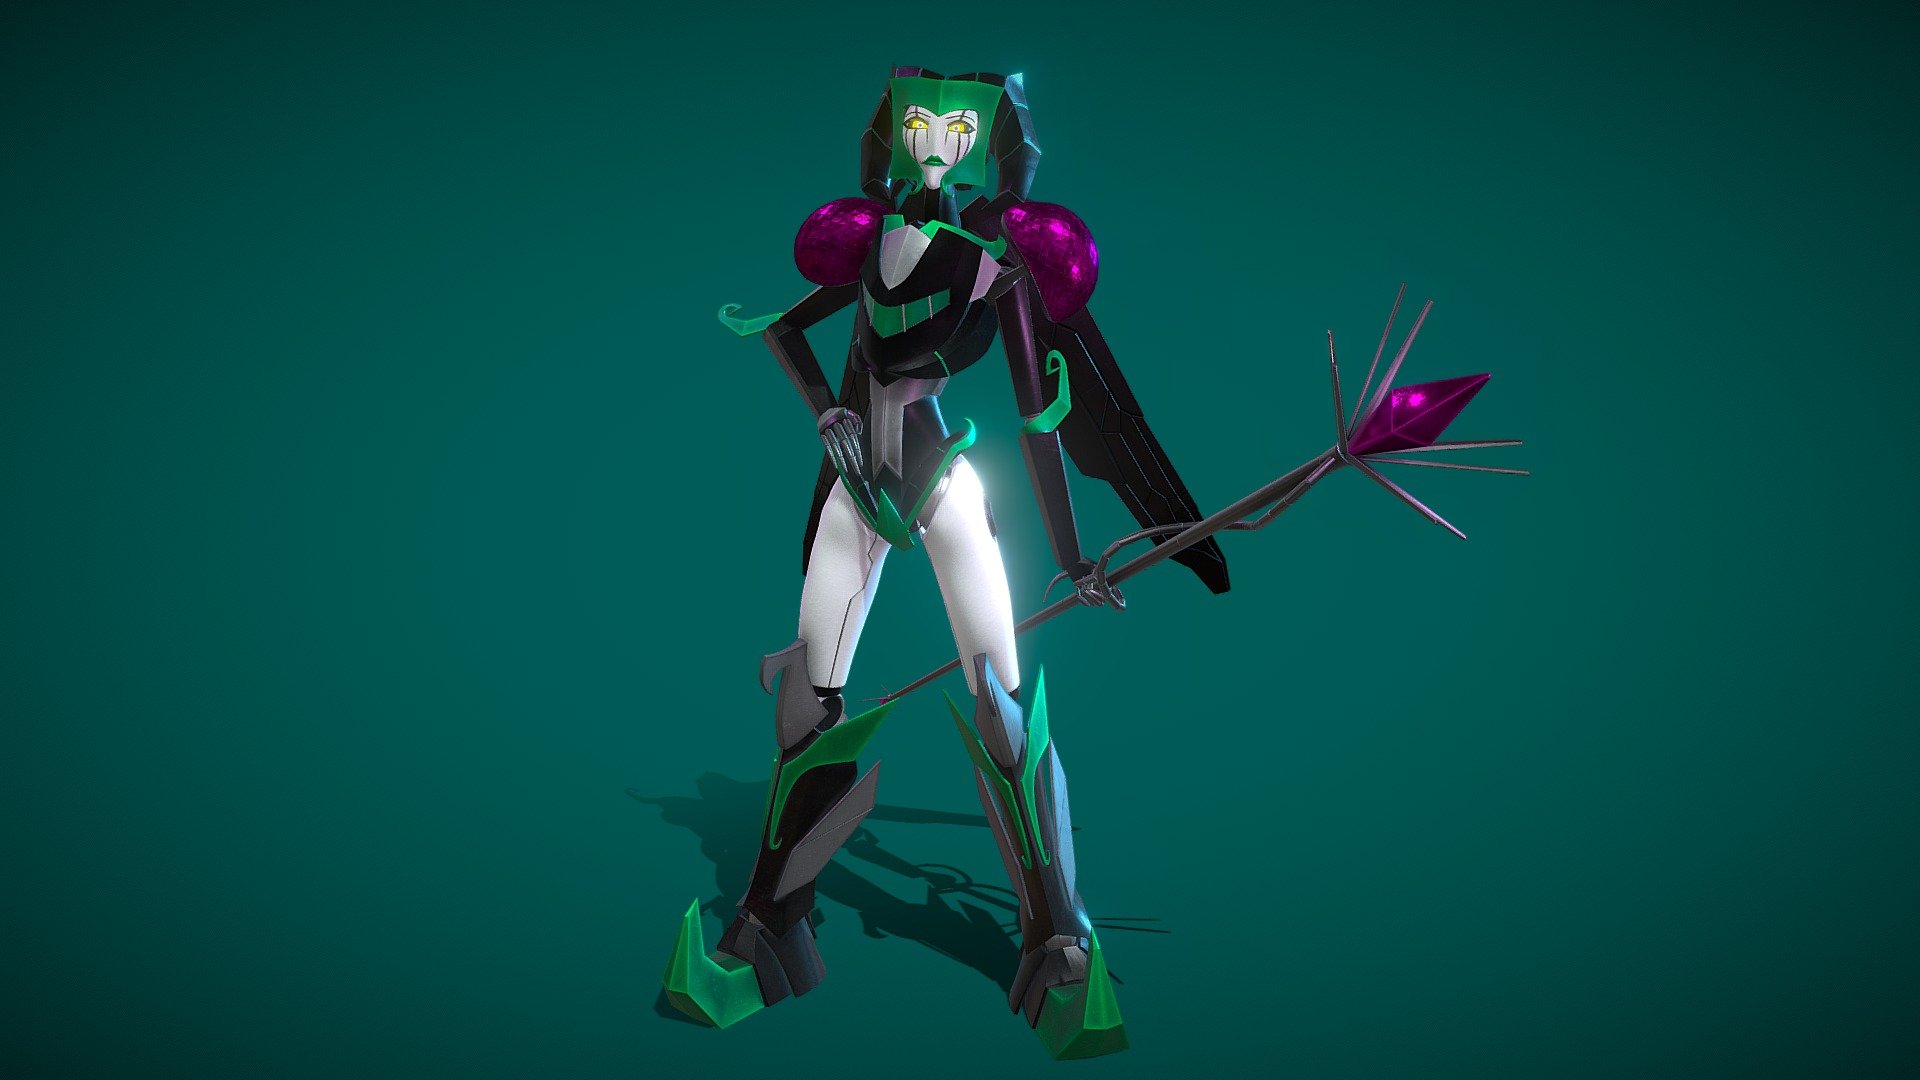 3D model rig of Malejest, a Decepticon from the Transformers Prime series. With rigging and PBR materials, ensuring appropriate usability for animations and games.

The native file type is BLEND as it was created with Blender, however with OBJ, FBX as well as PBR textures provided, it will work with any 3D programs.

All rights of the Transformers brand belongs to Hasbro.

&mdash;NOTES&mdash;
For a more in depth look of the purchasable package, check out the portfolio post: https://www.artstation.com/artwork/lV32yG

&mdash;DETAILS&mdash;

In this package includes:





Blender file (.BLEND) with armature rigging, proper materials and PBR textures set up.




PBR textures in 4K, including these maps: Color, Metallic, Specular, Roughness, Emission.




OBJ and FBX files.



The model in Blender project file also completed with Crease edges and therefor, subdivision ready.

Thank you for your support of my products and look out for more soon 3d model